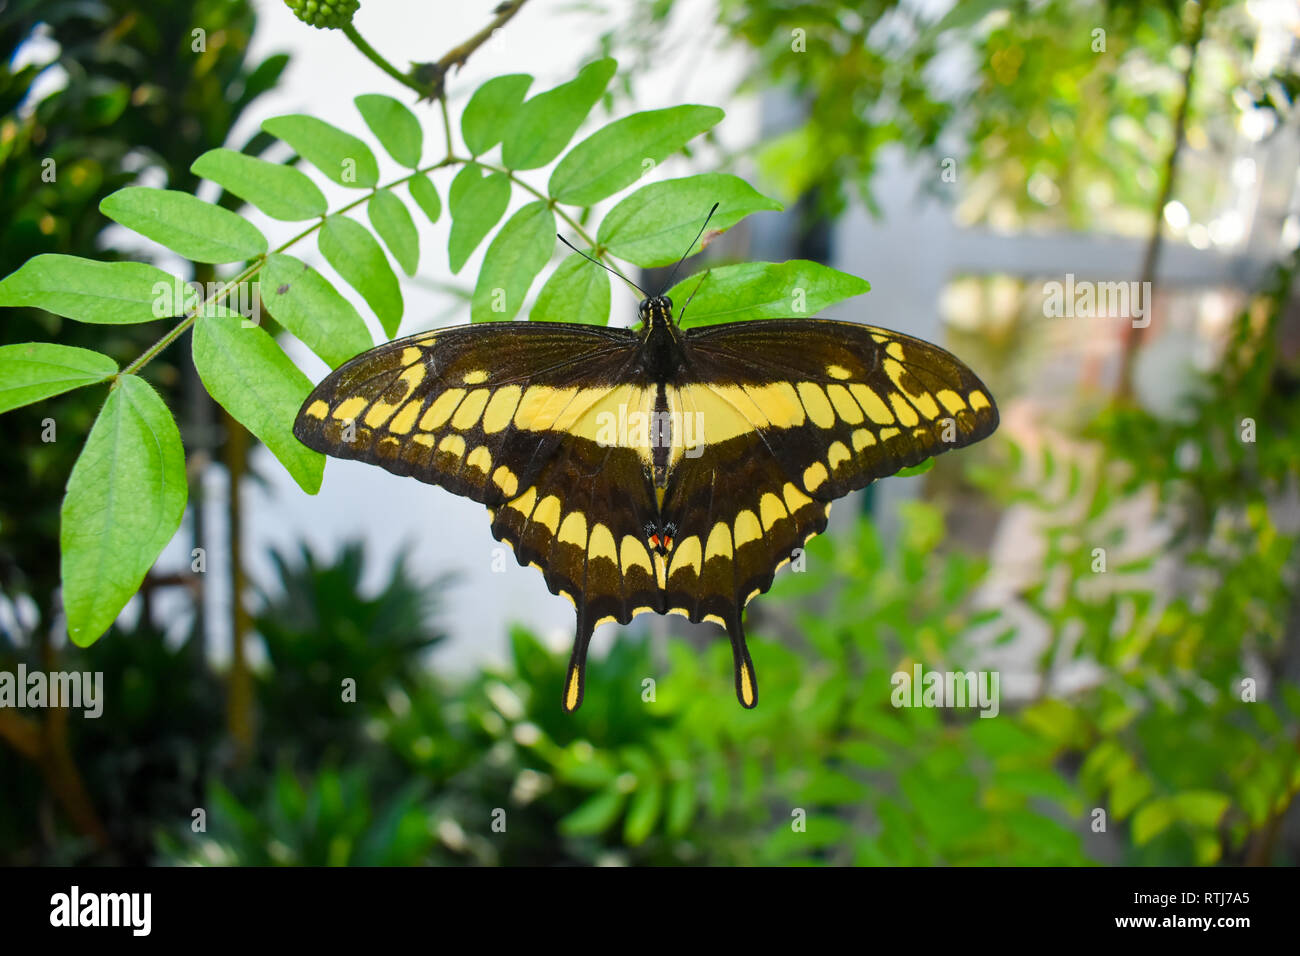 Giant Swallowtail butterfly (Papilio cresphontes). Stock Photo